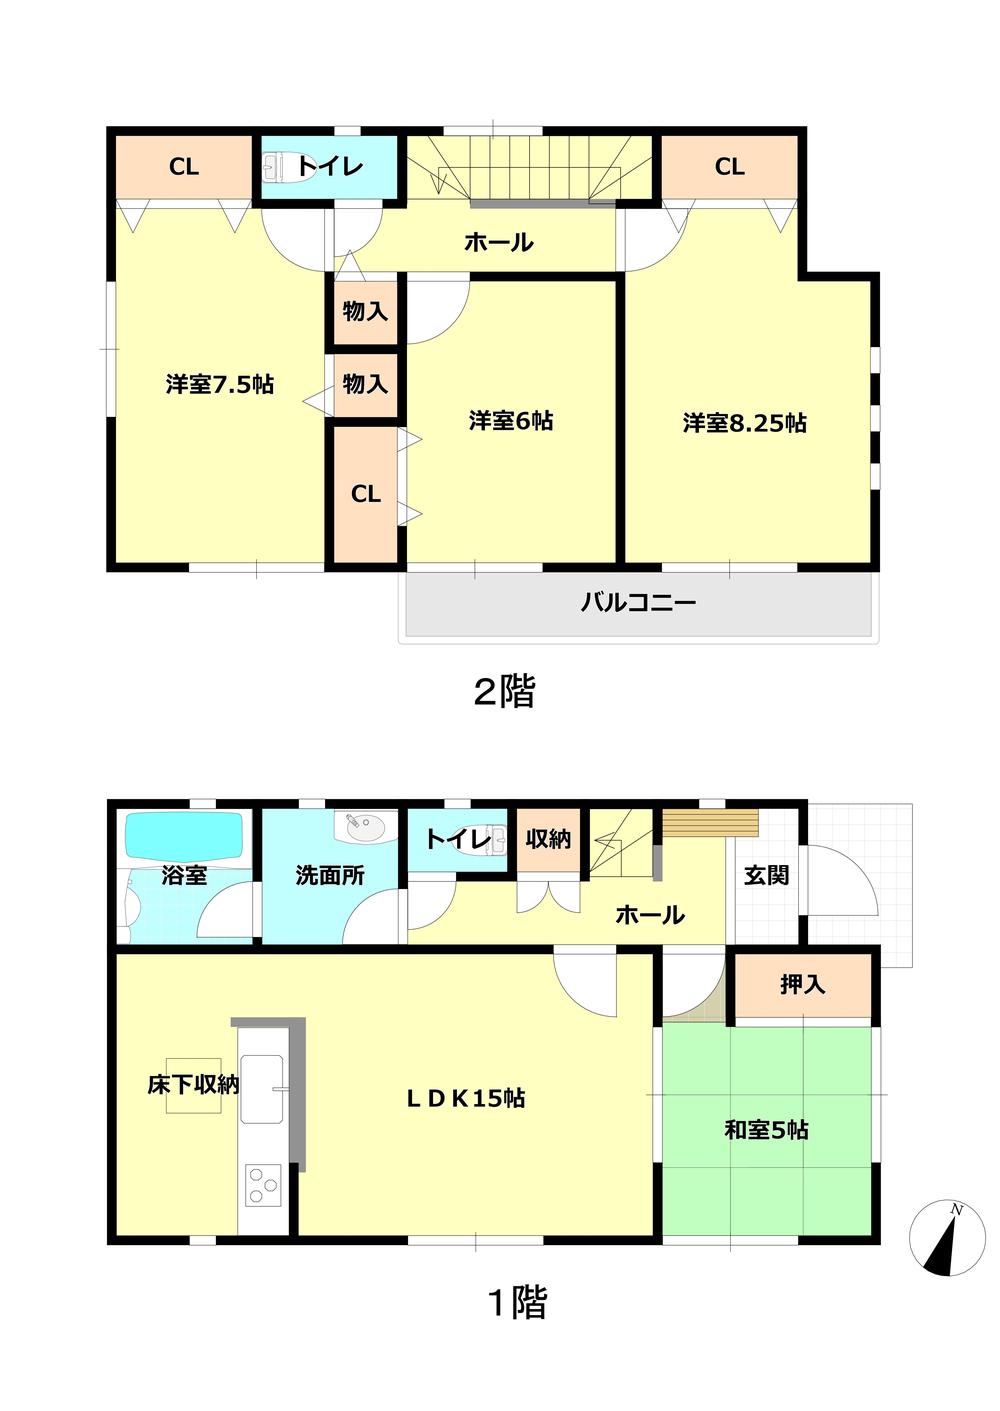 Floor plan. 17.8 million yen, 4LDK, Land area 220.5 sq m , We will give priority to the building area 98.82 sq m Current Status. 